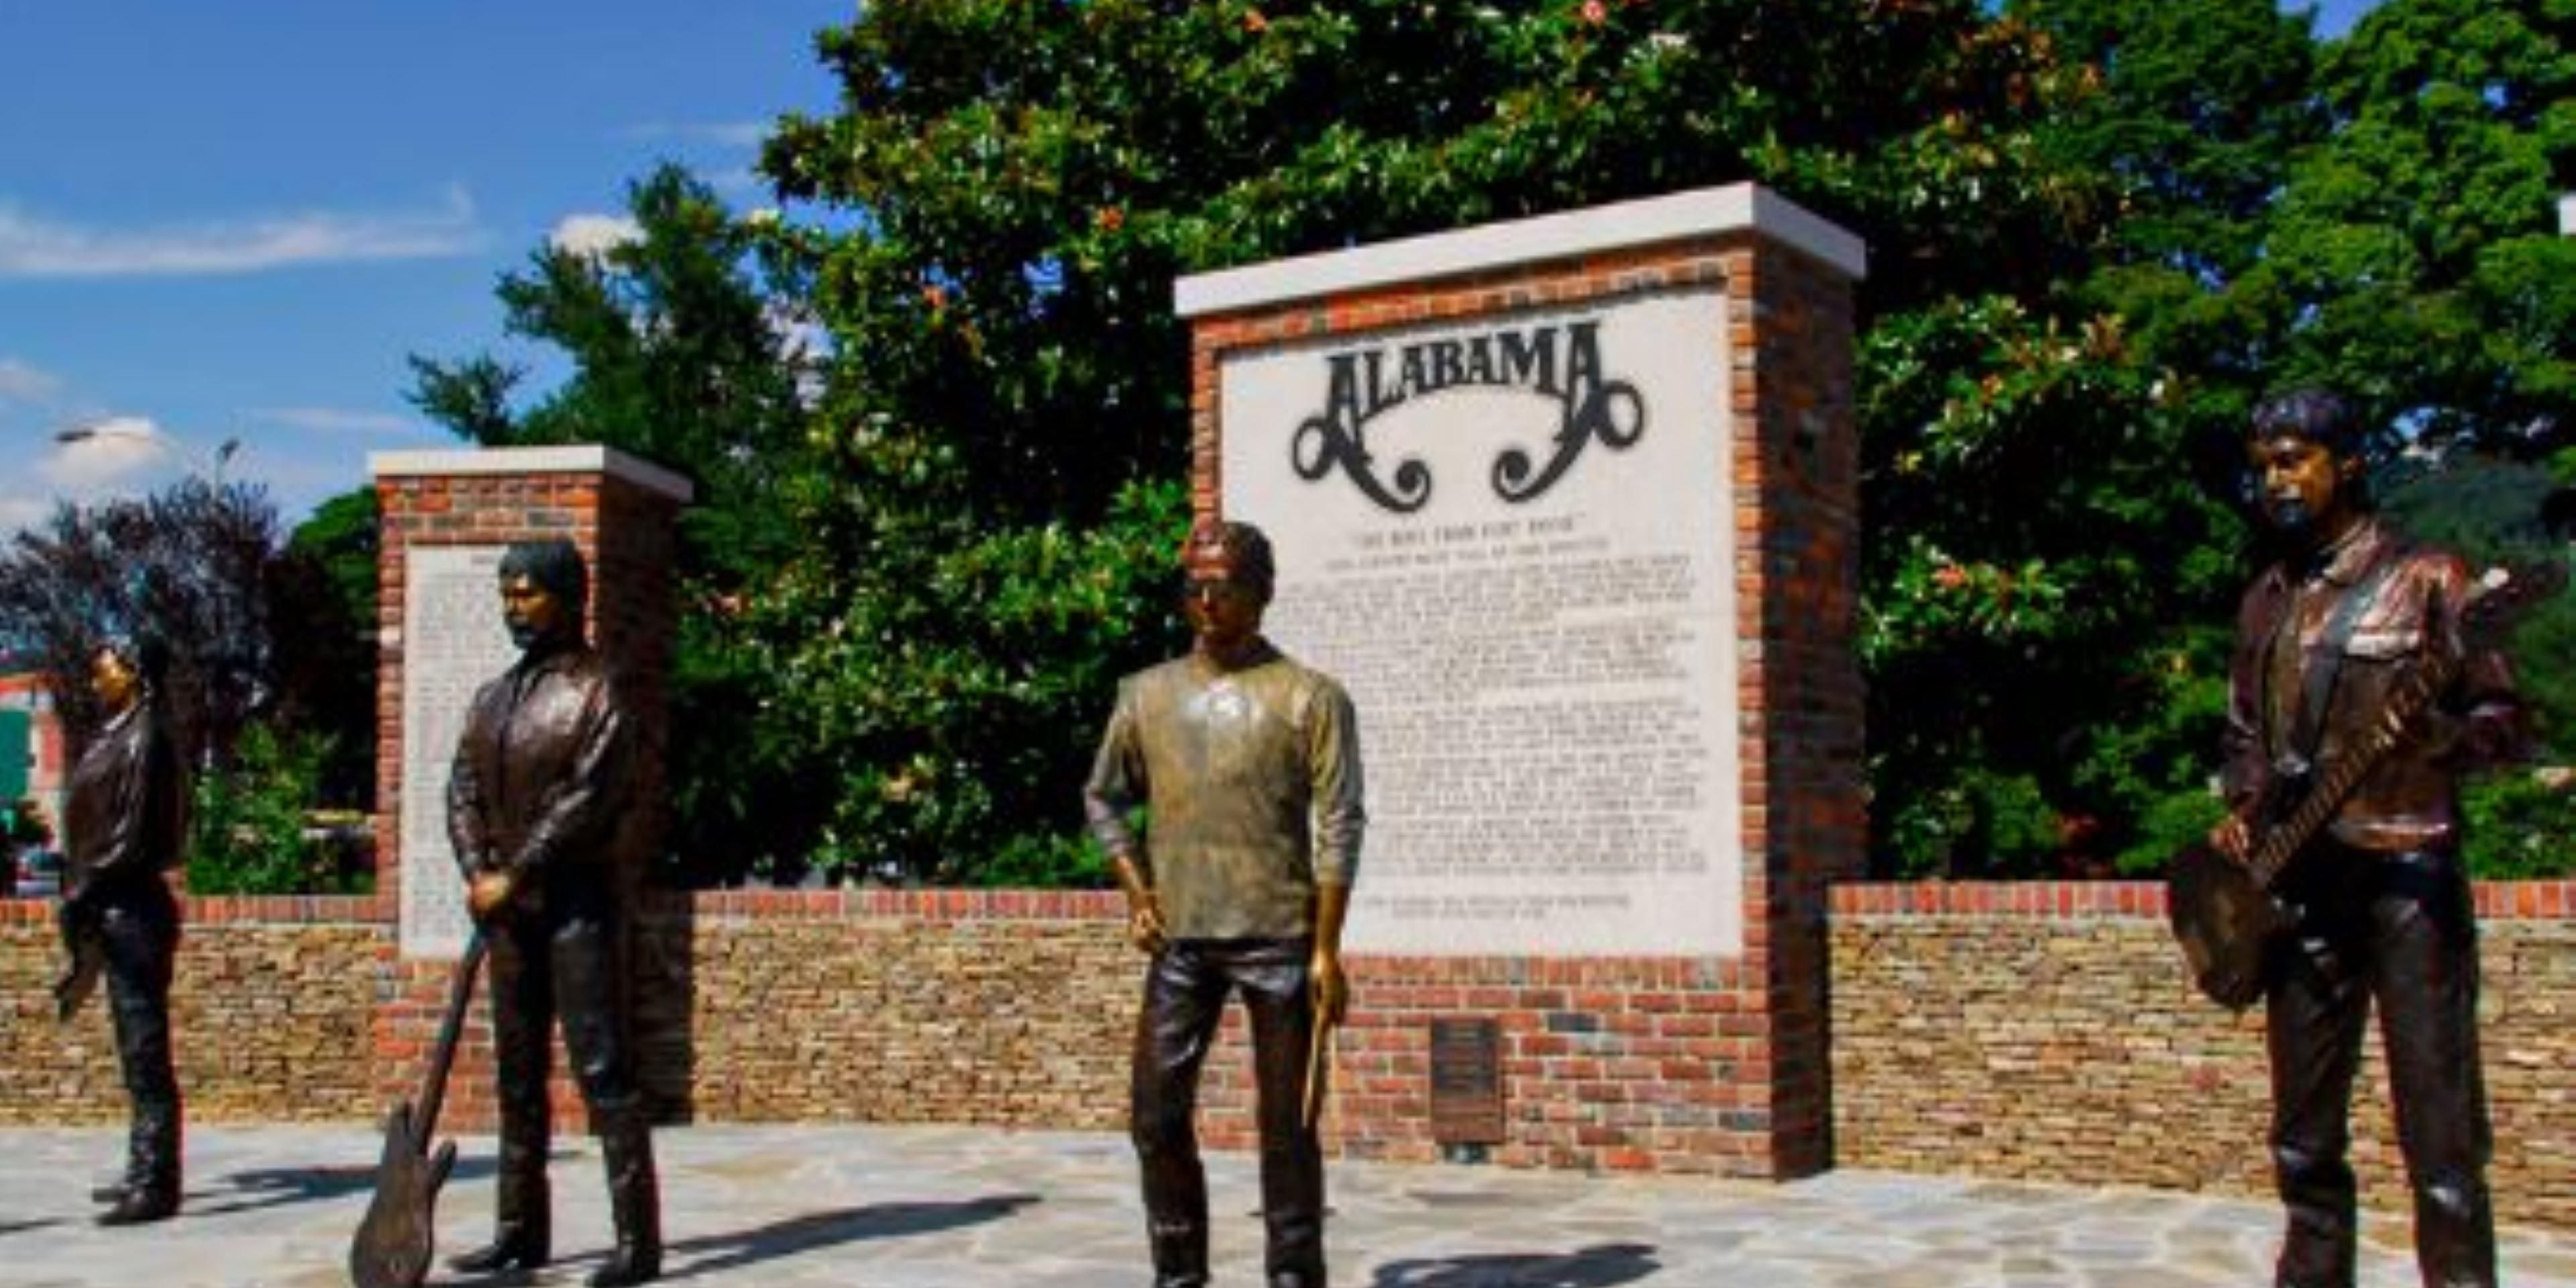 Visit the ALABAMA Museum featuring over 50 years of country music memorabilia.  
This museum houses awards and achievements, collections from the bands youth and a gift shop. View bronze statues of Randy Owen, Teddy Gentry, Jeff Cook and Mark Herndon at Fort Payne City Park. 
